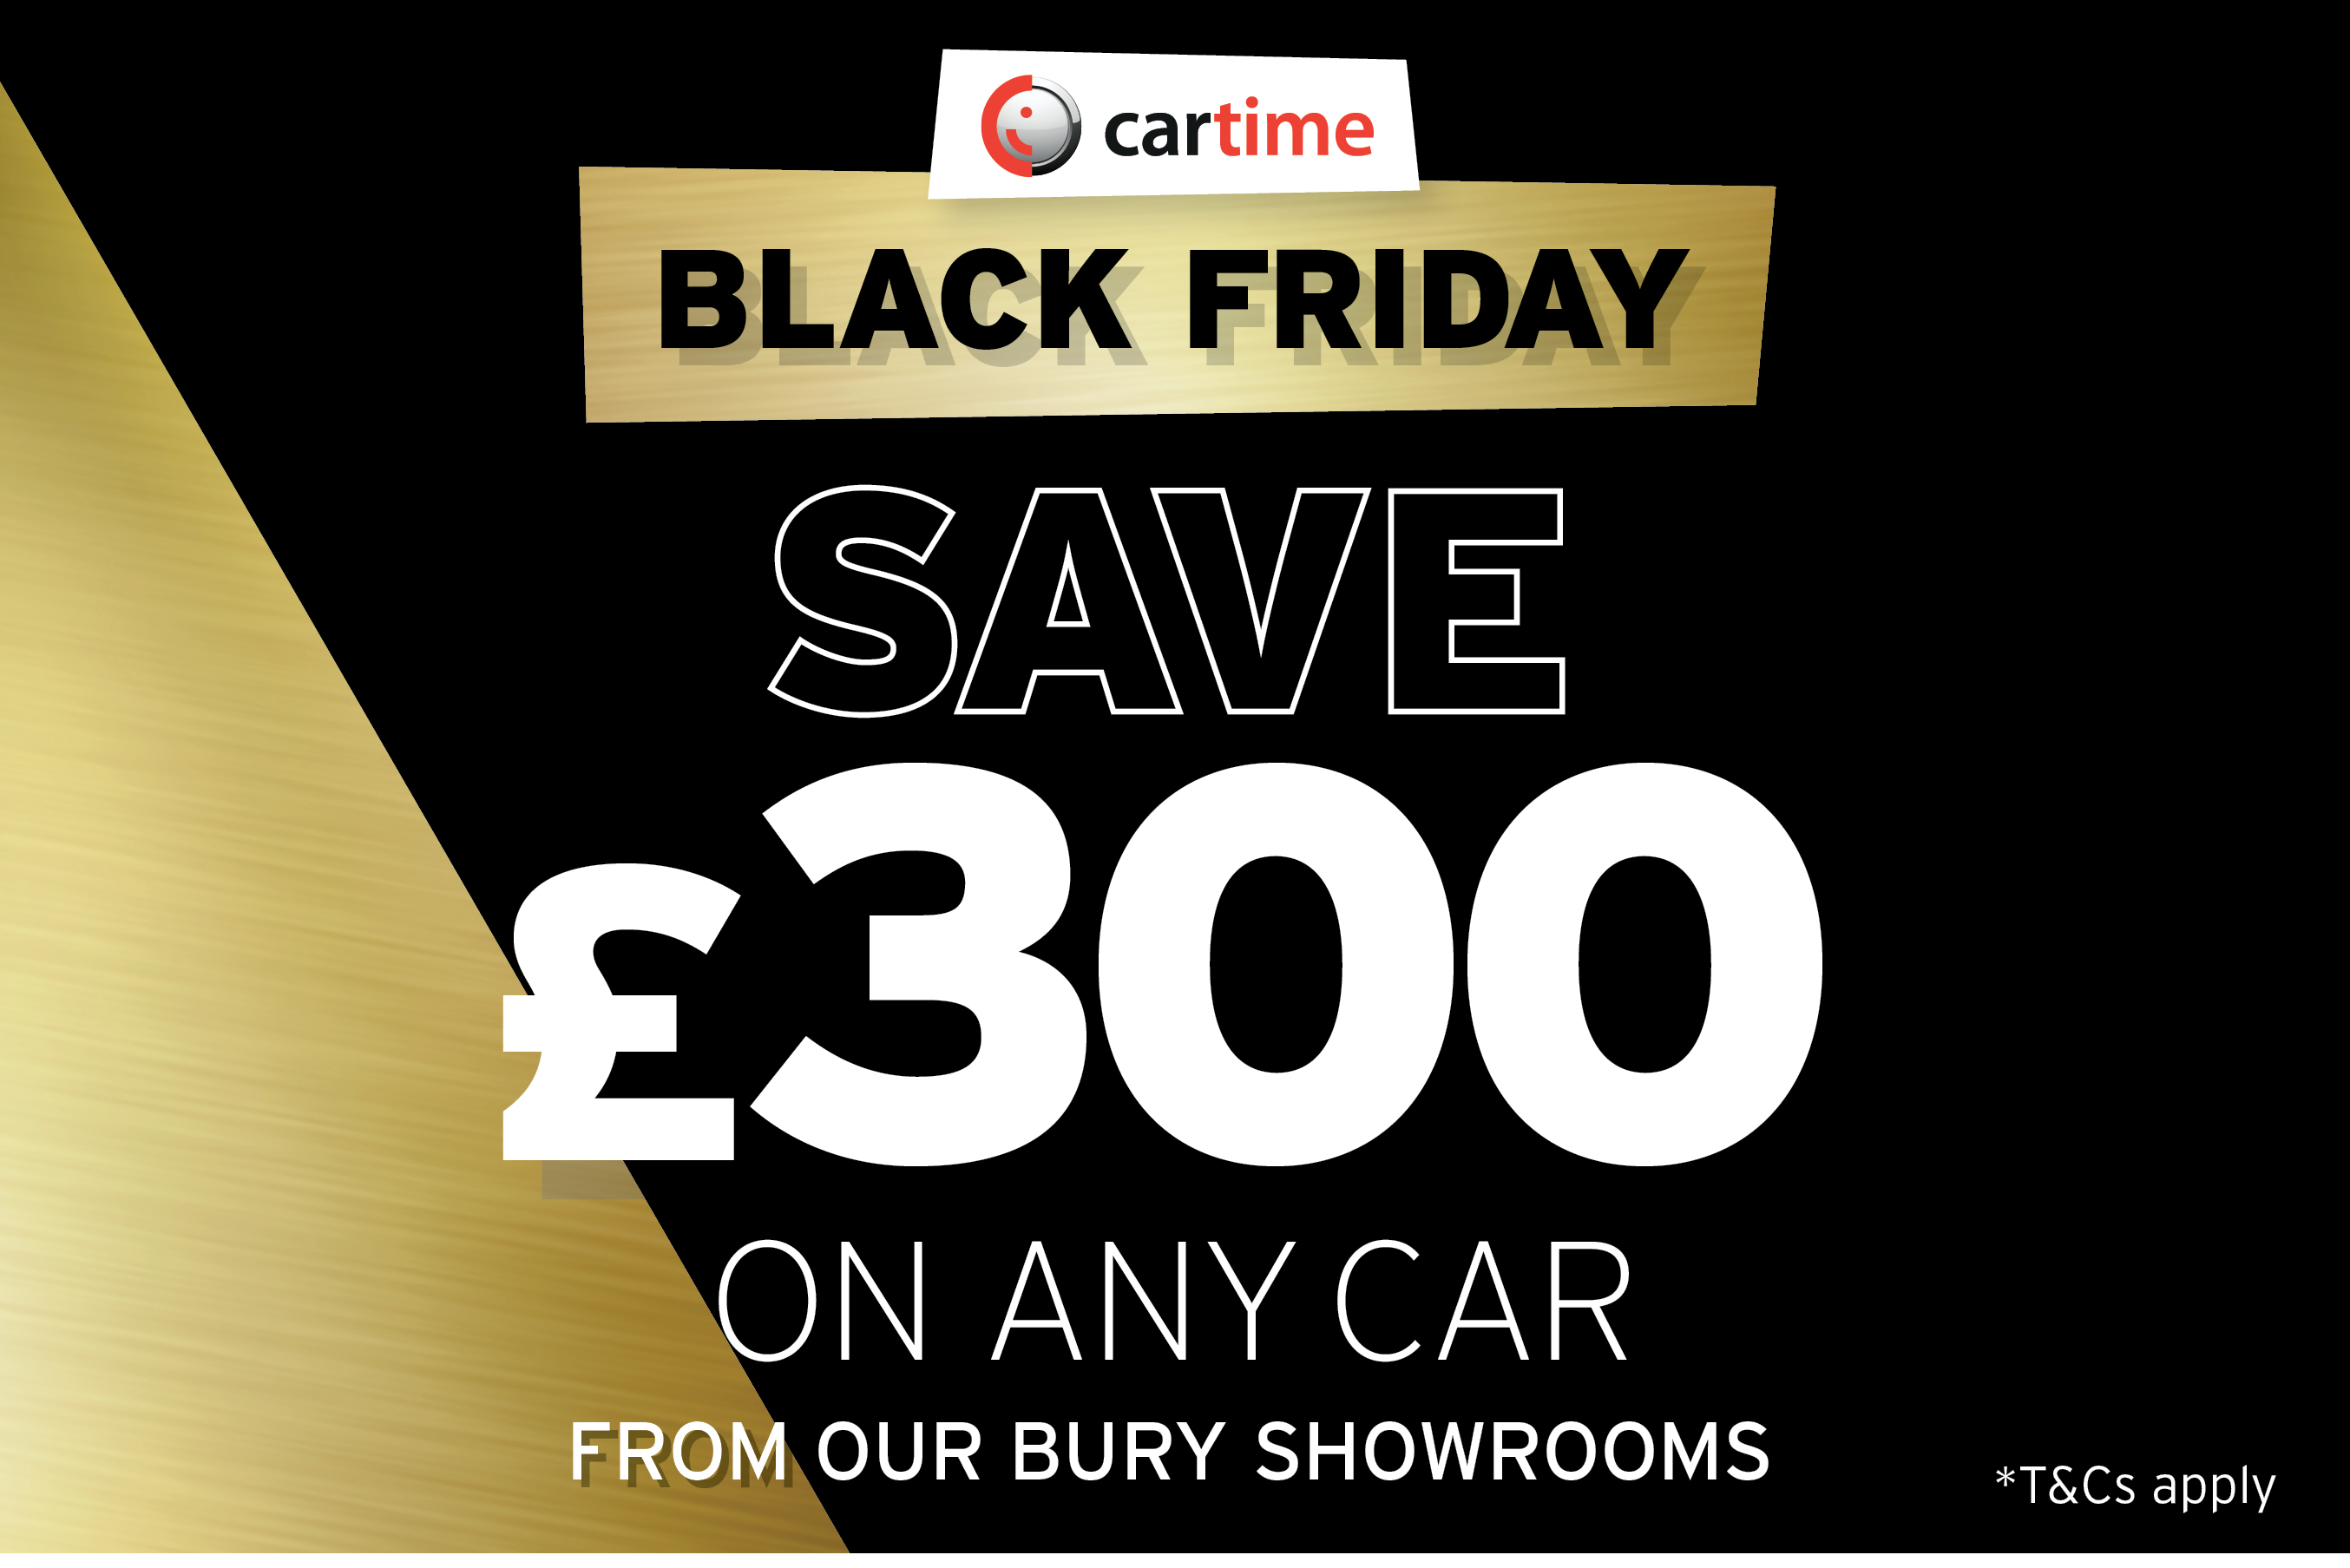 Main image for post: Black Friday Comes Early - Receive £300 Off Any Car